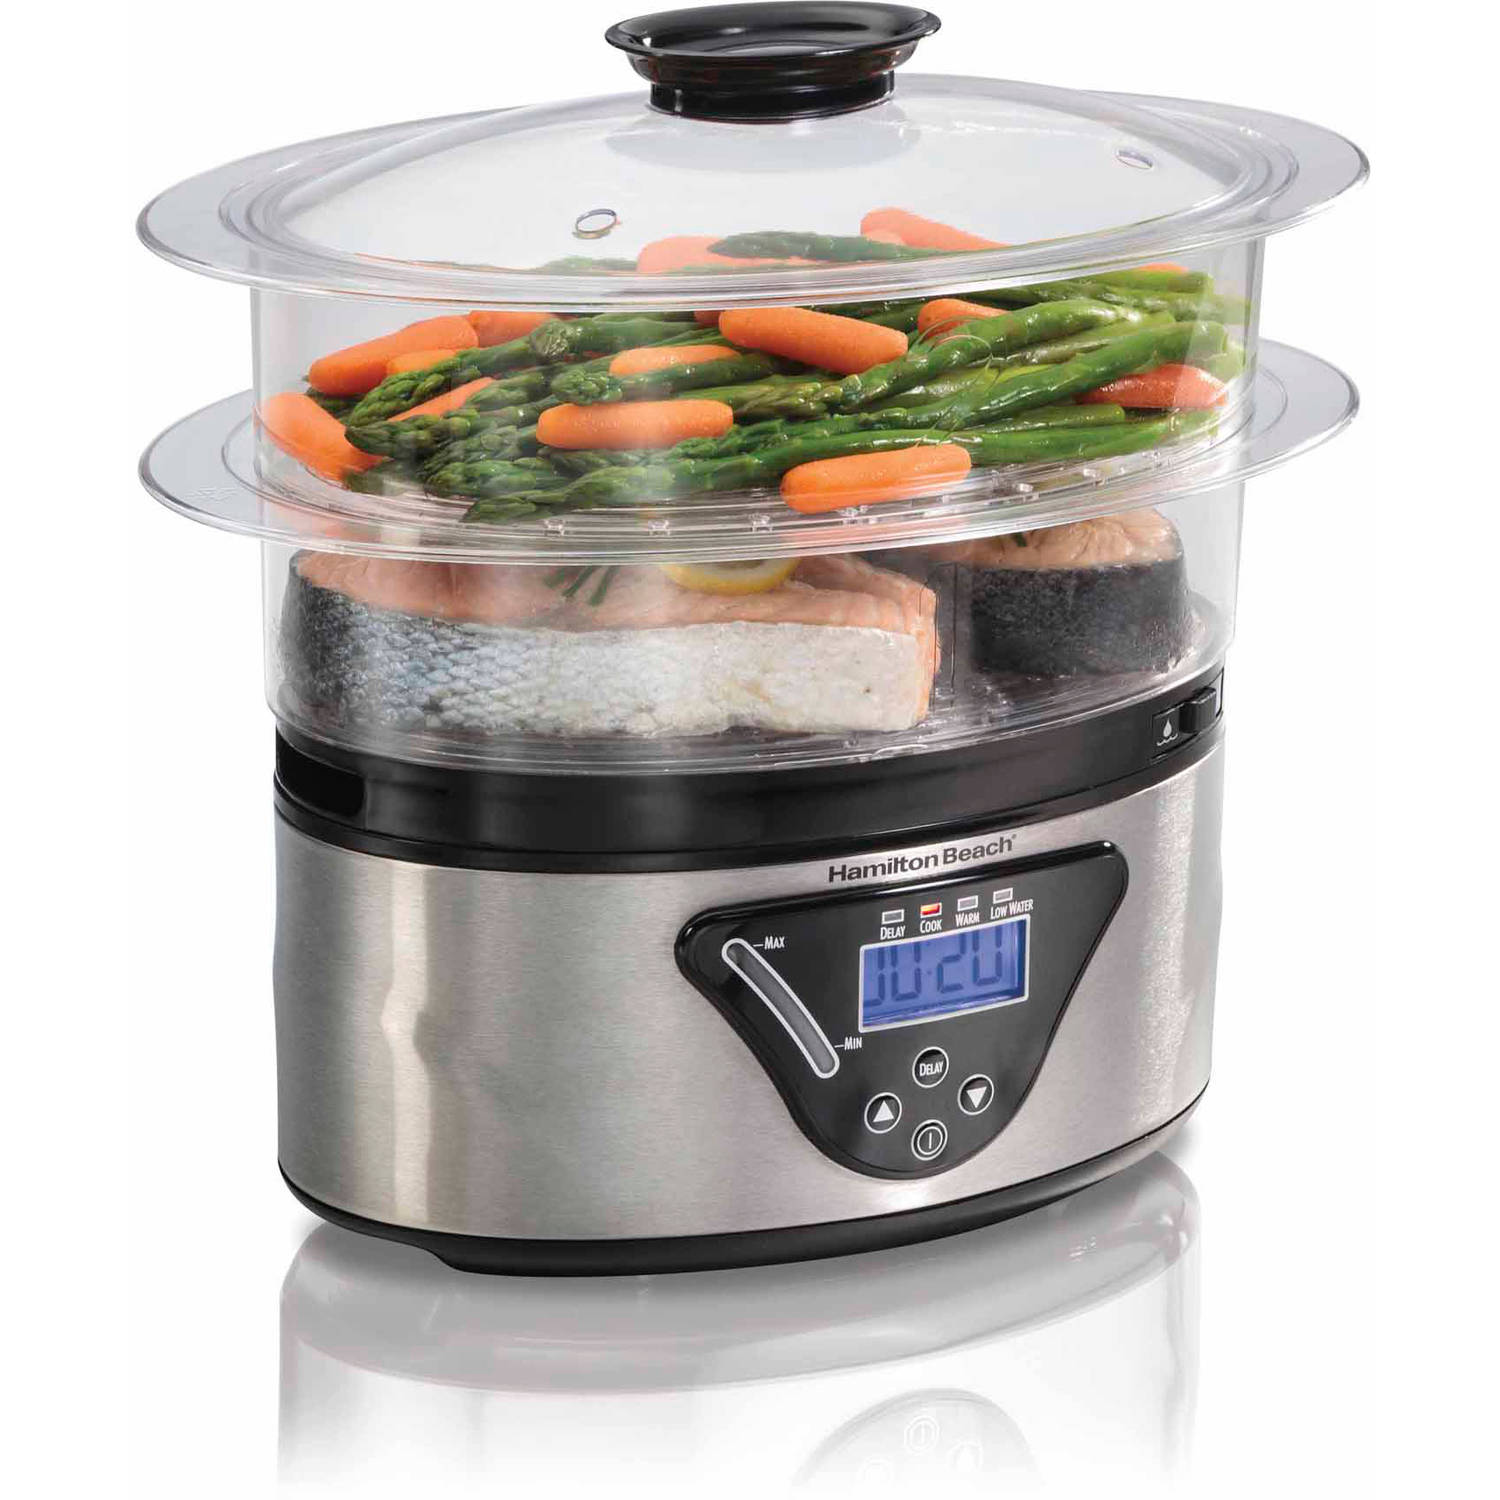 Hamilton Beach Food Steamer and Rice Cooker, Digital Programmable, 5.5 Quart Capacity, 2-Tier, Silver, 37530 - image 4 of 8